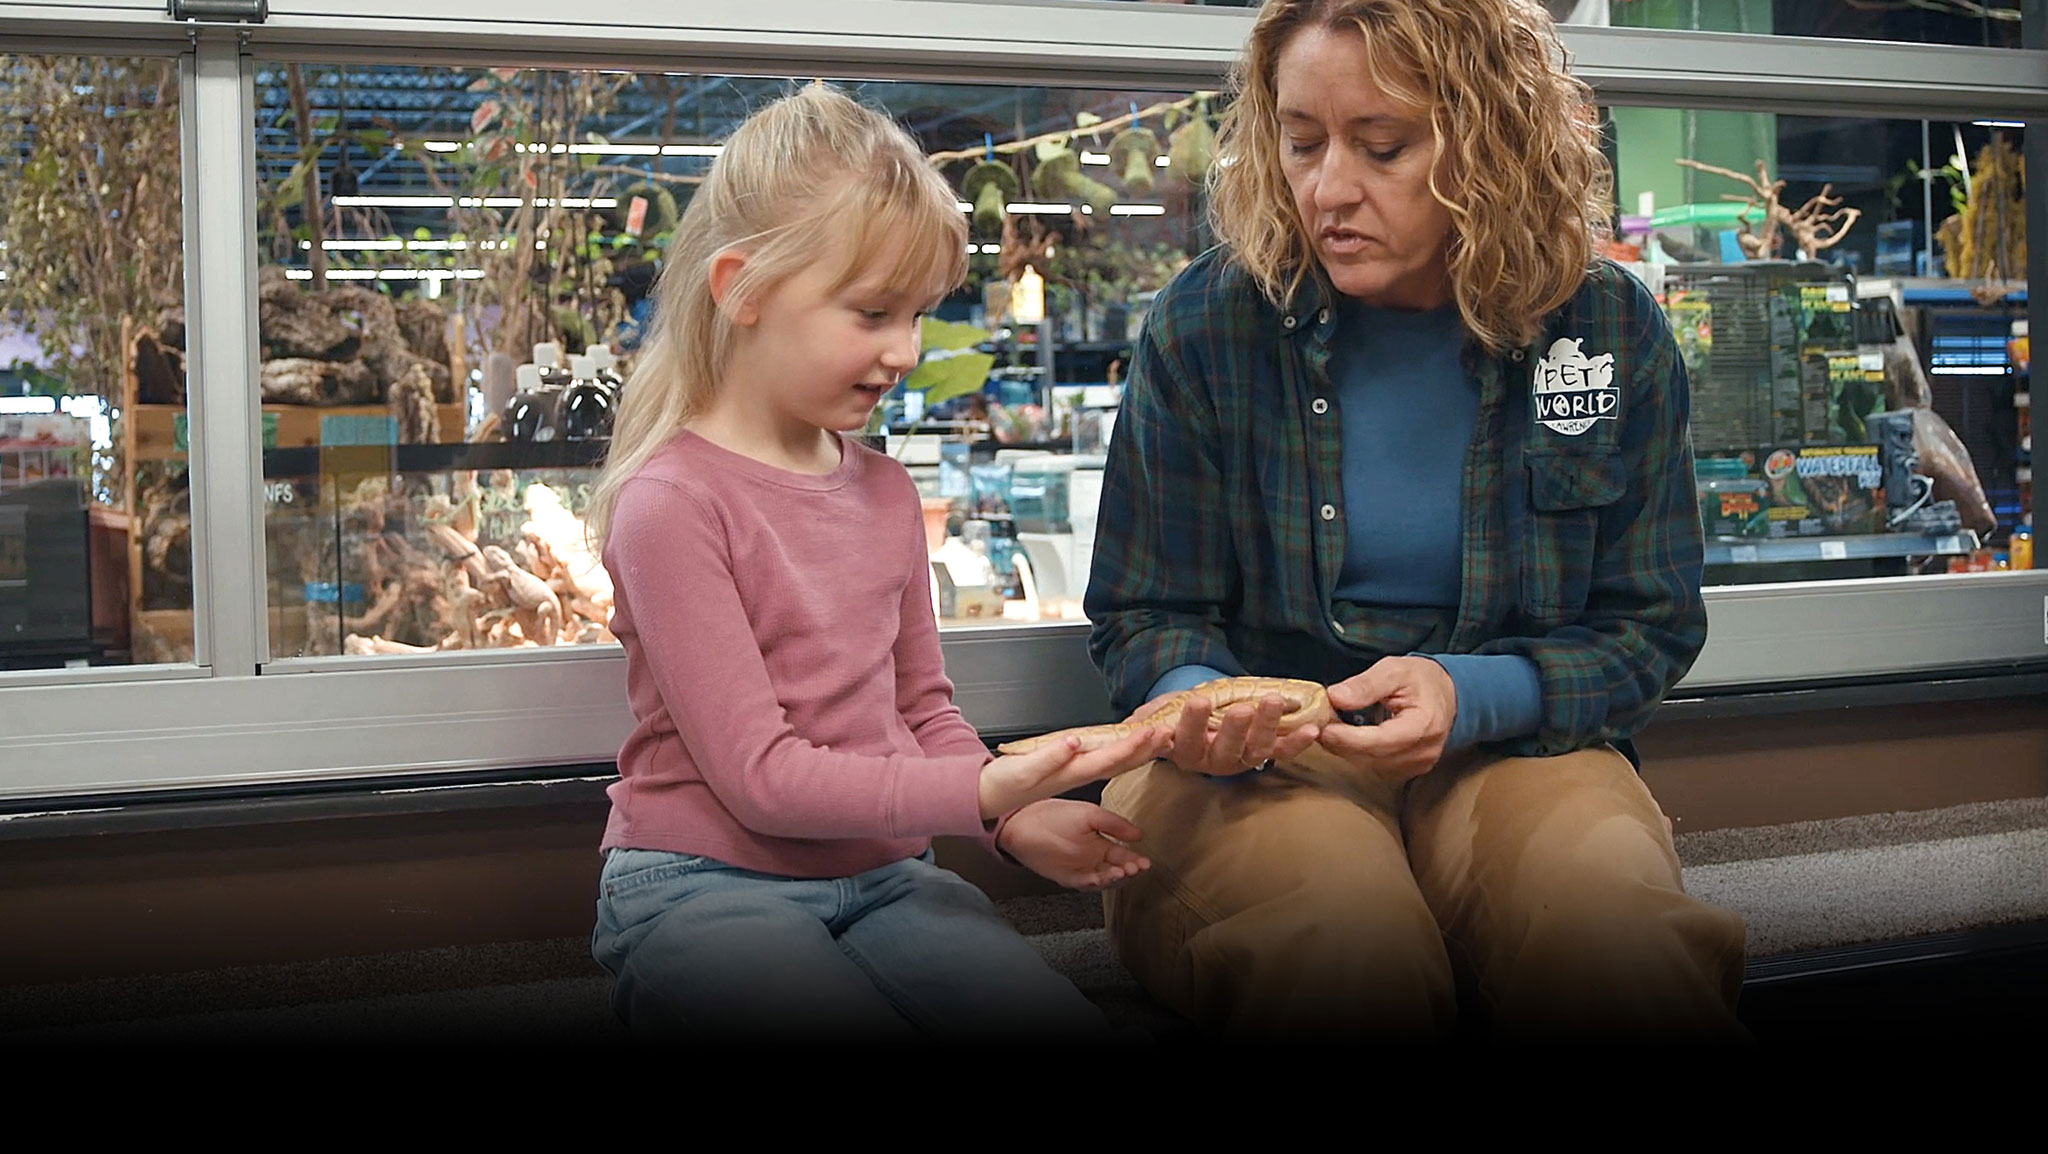 pet world employee showing a young girl a snake